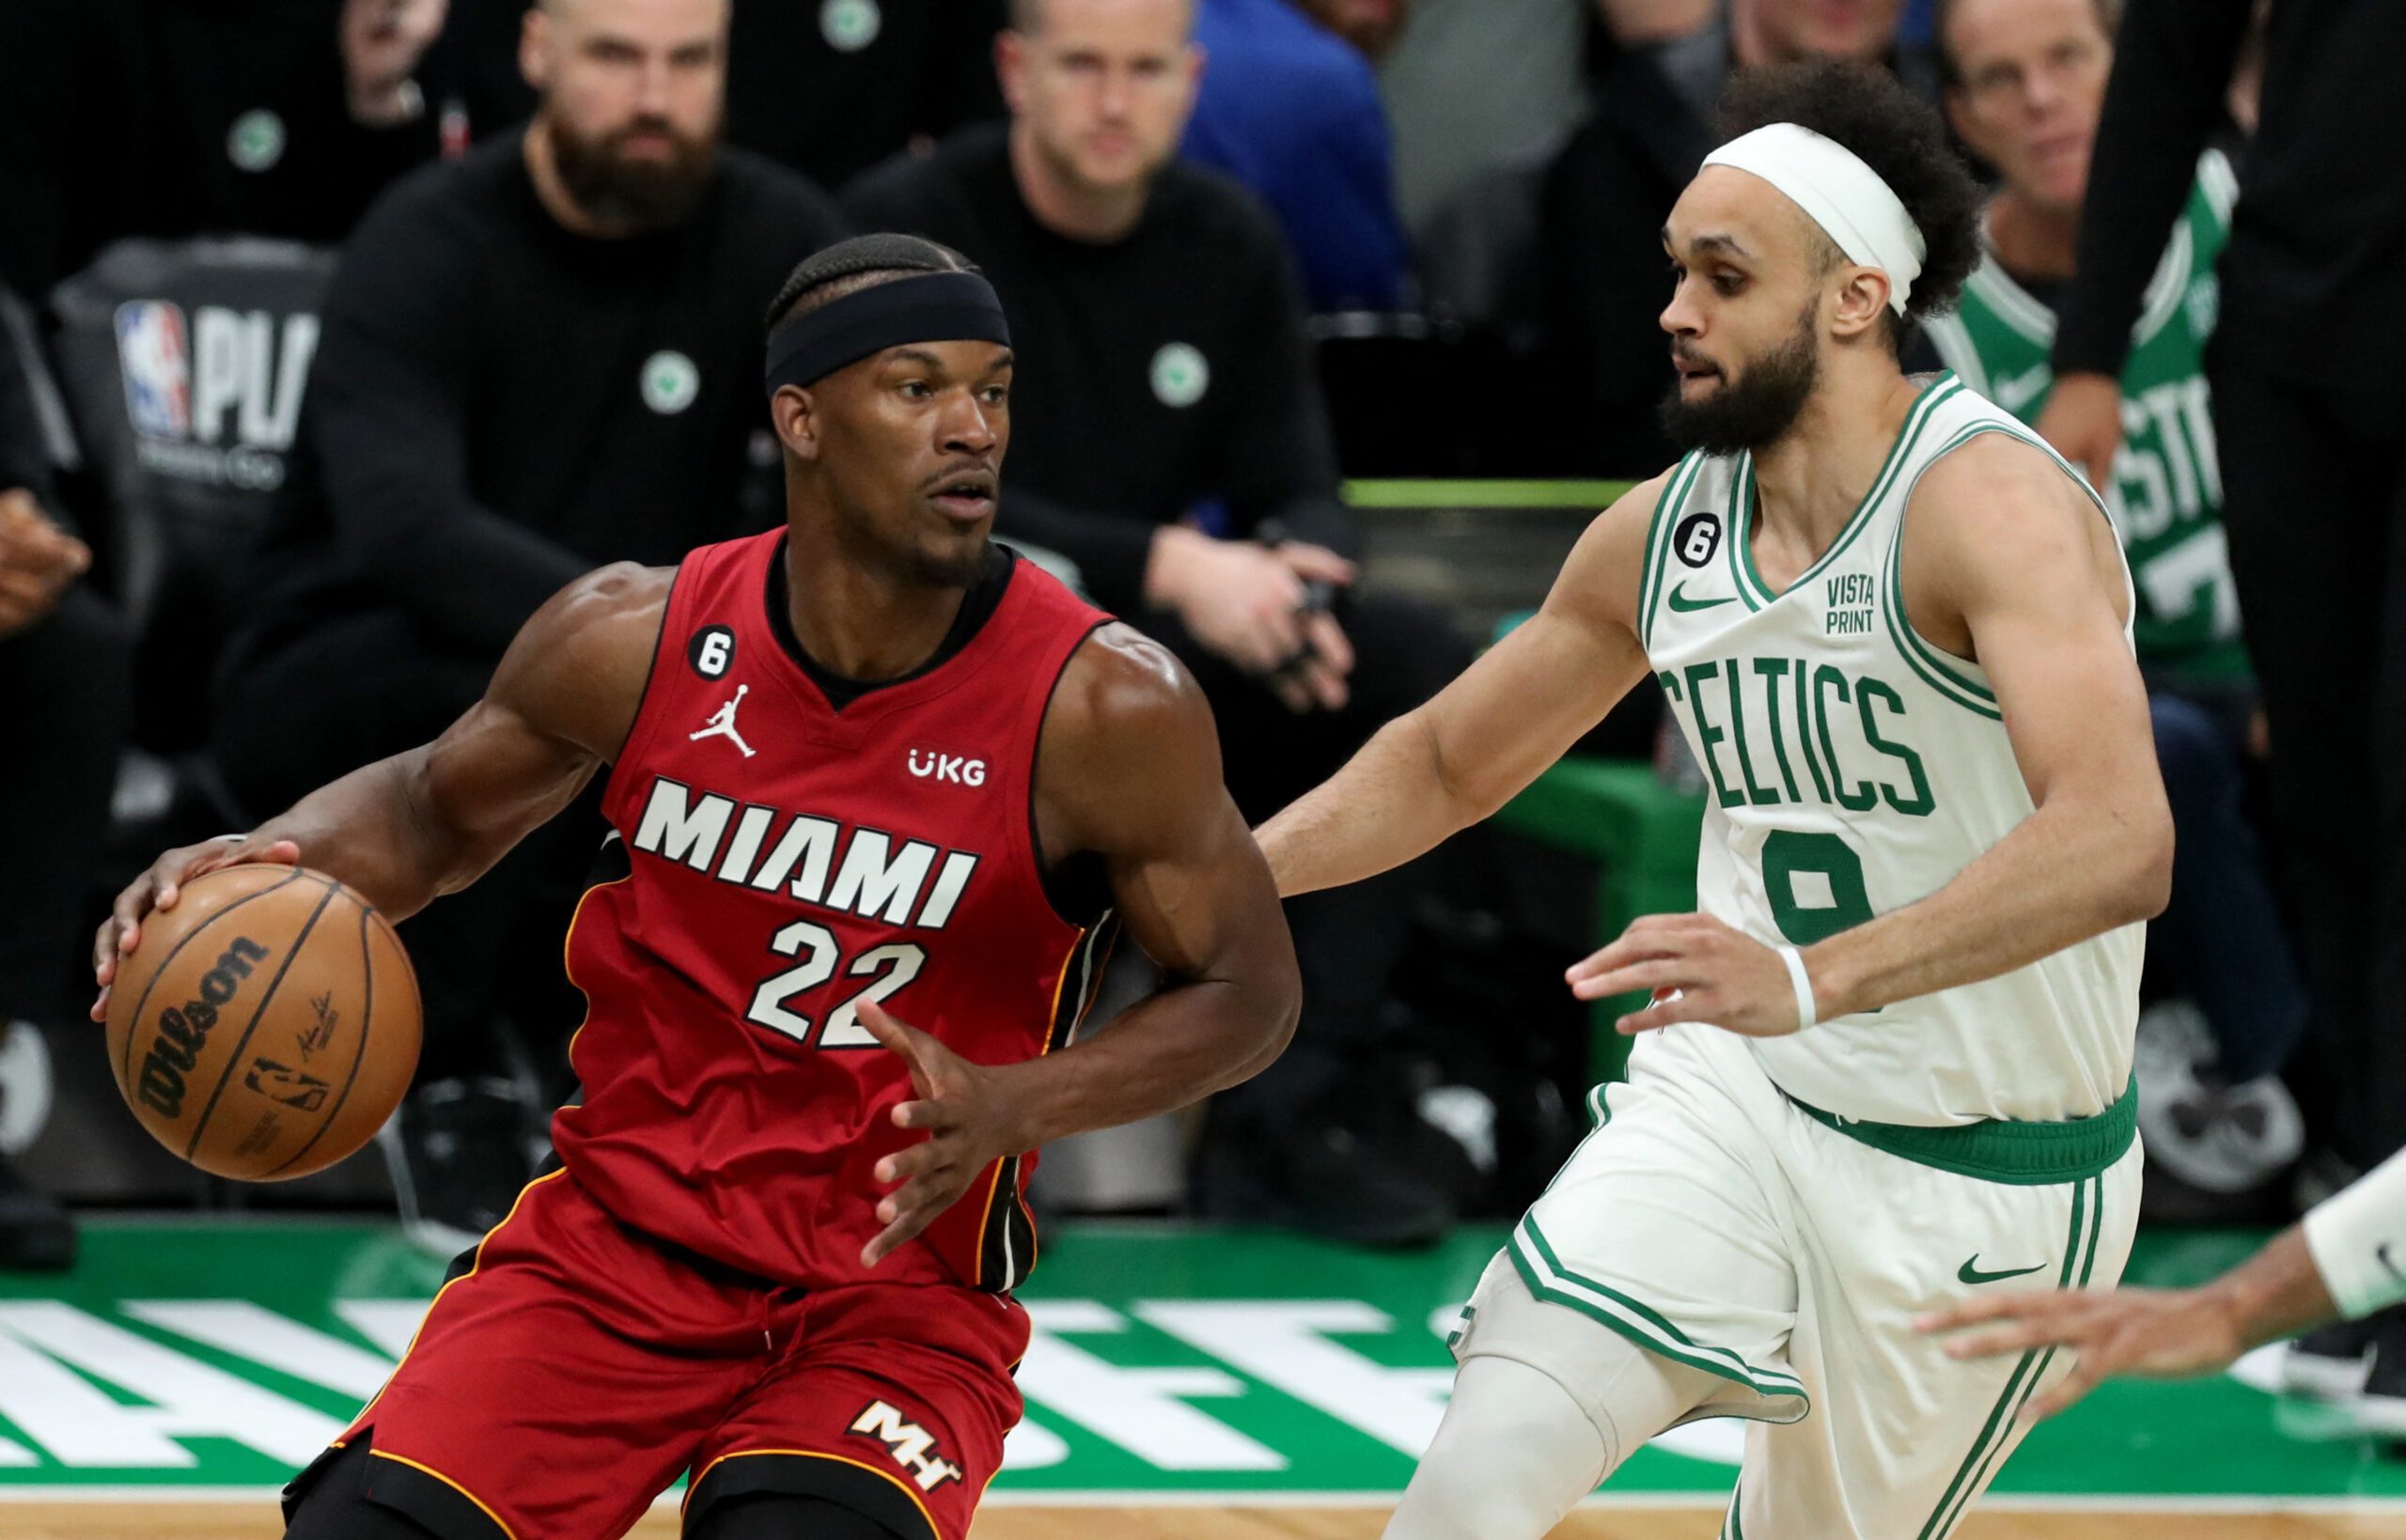 Jimmy Butler, Heat topple Celtics to steal Game 1 of East finals